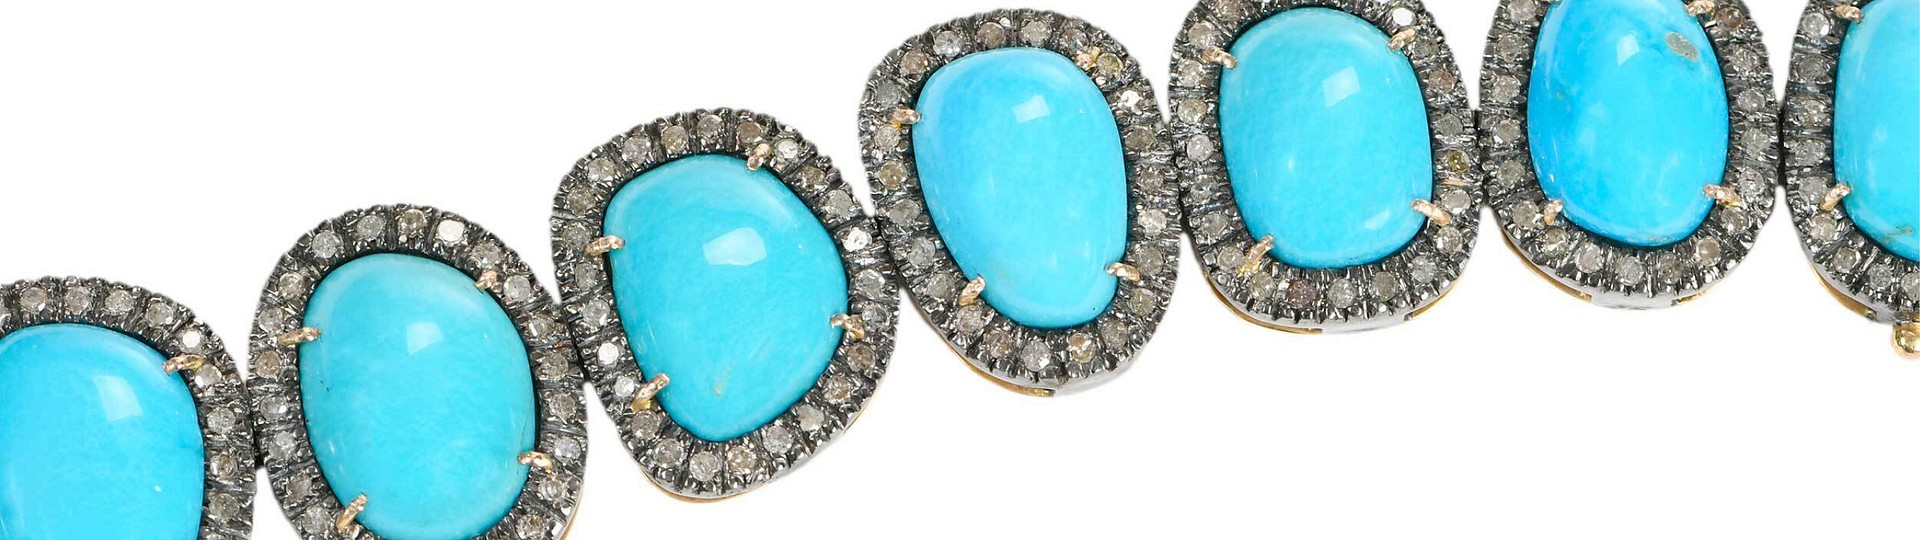 Gemstones and Jewelry Auction by Brunk Auctions